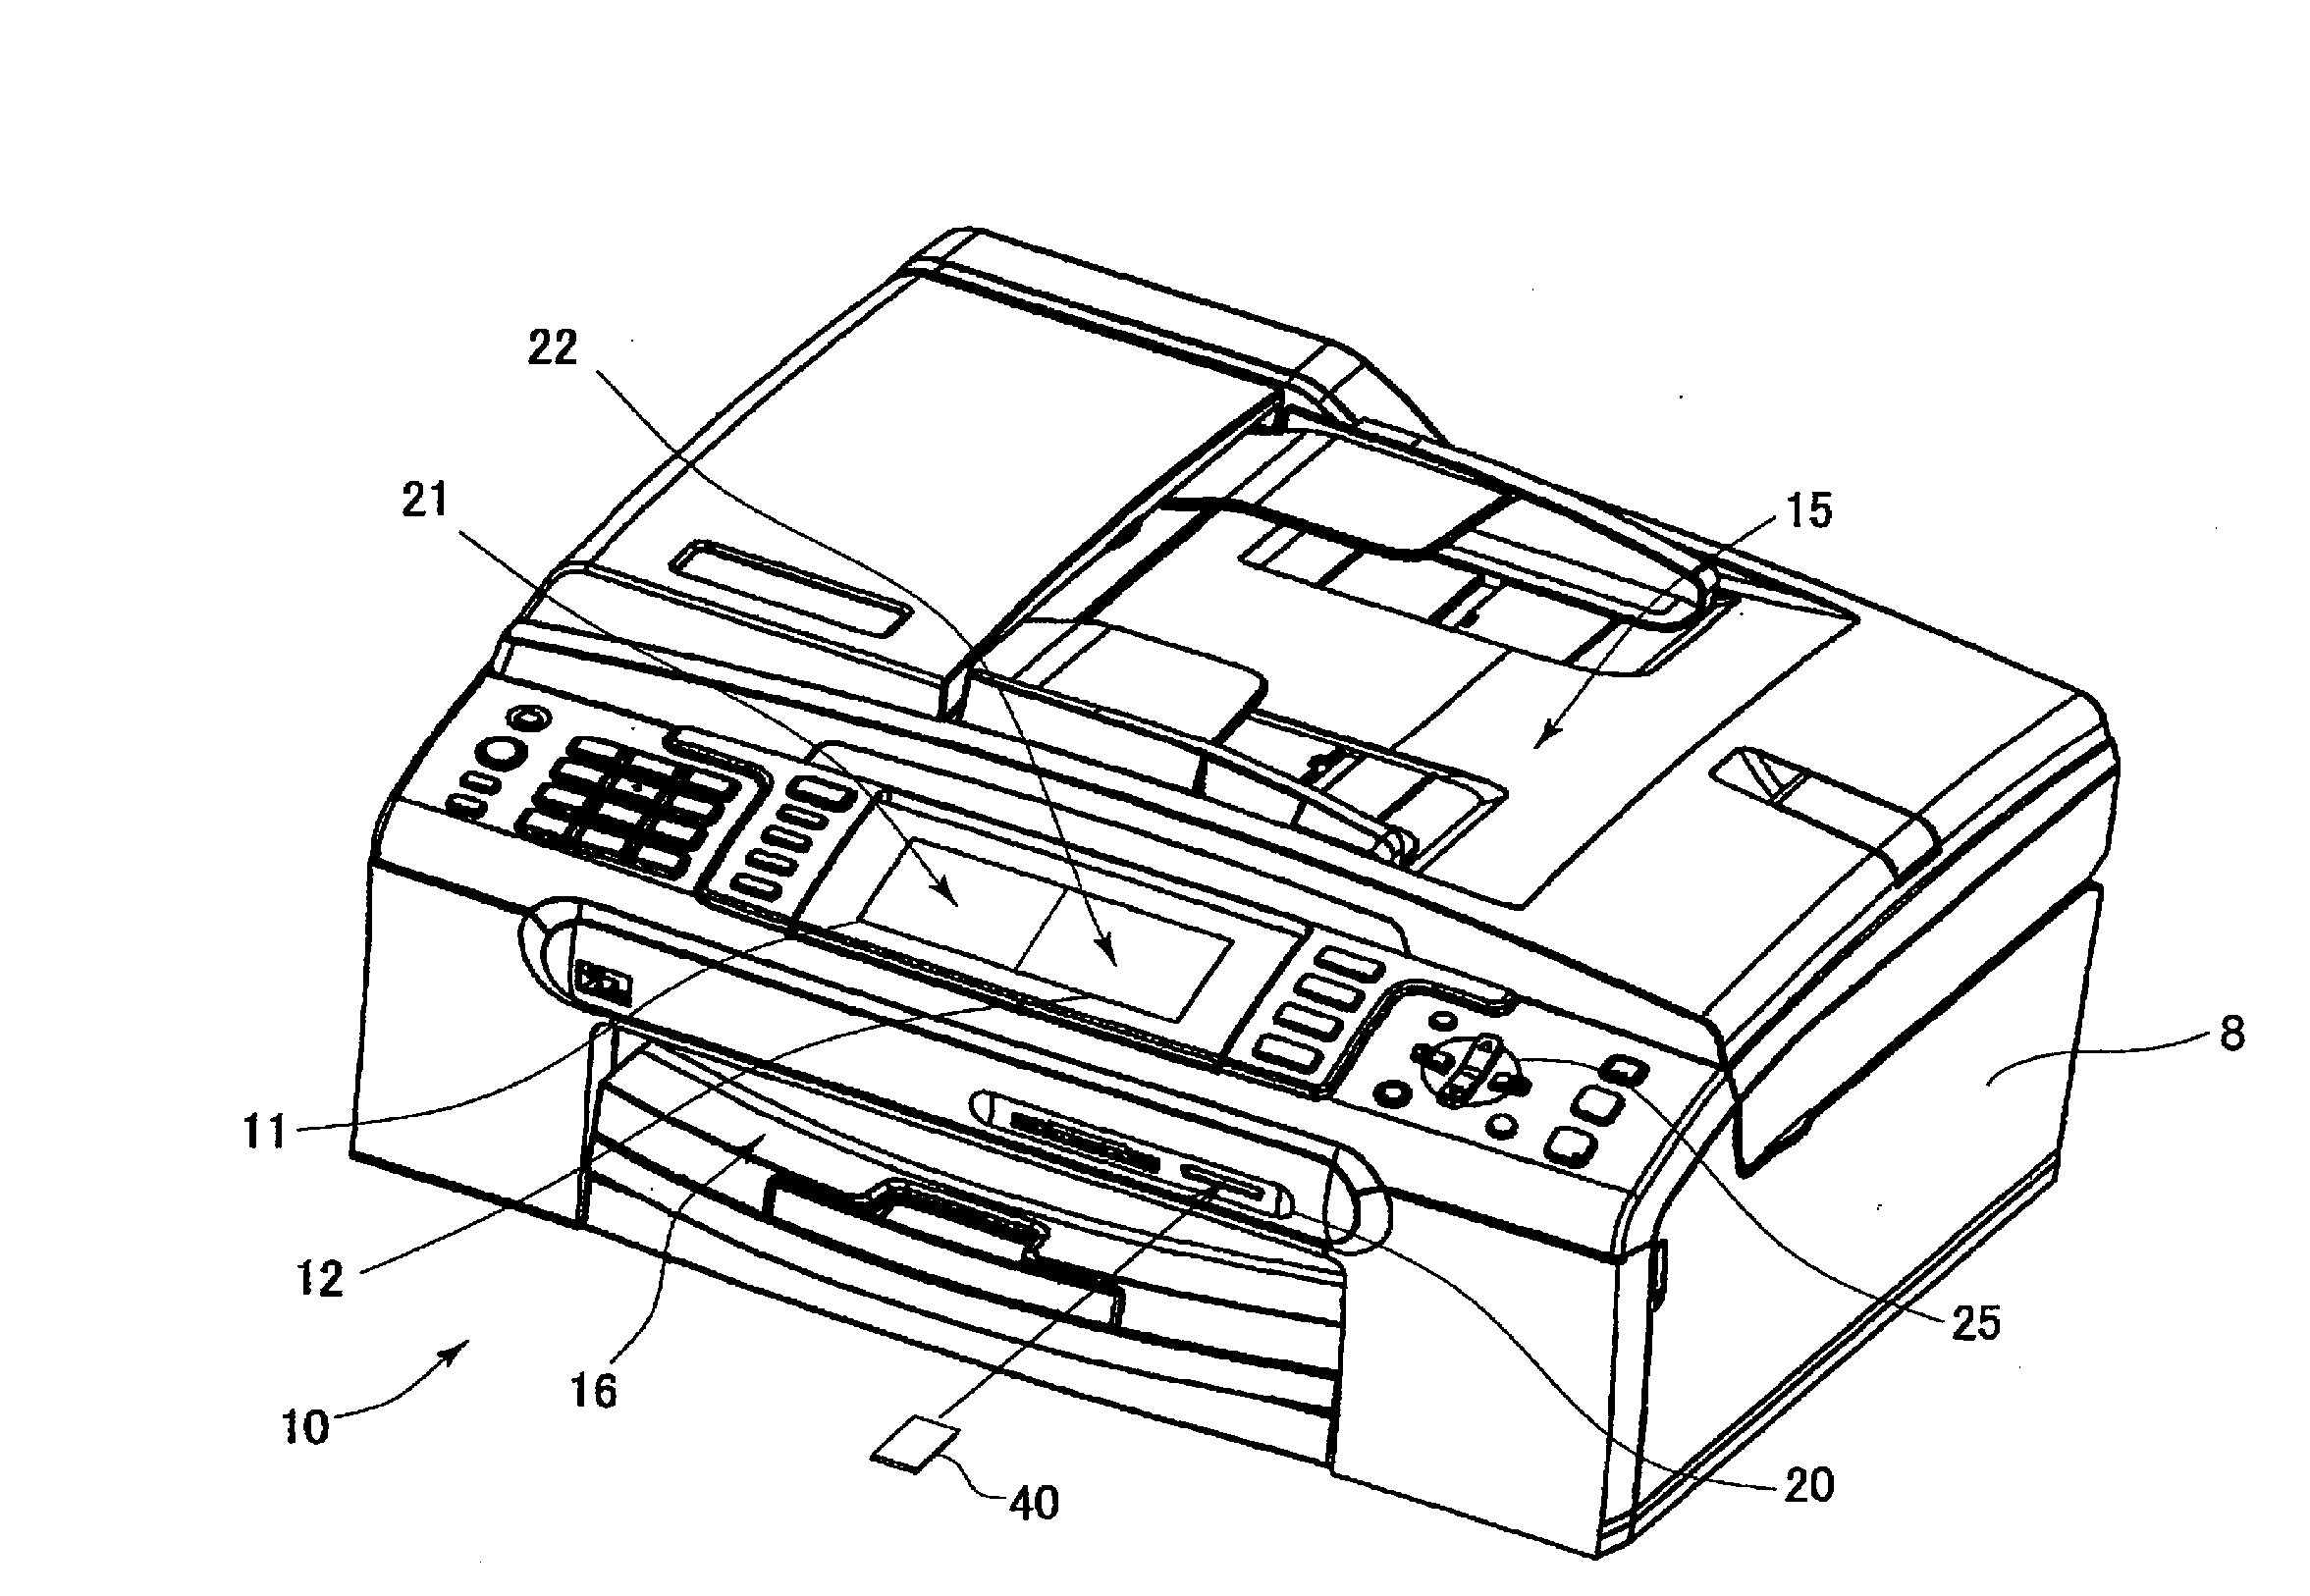 Image display devices